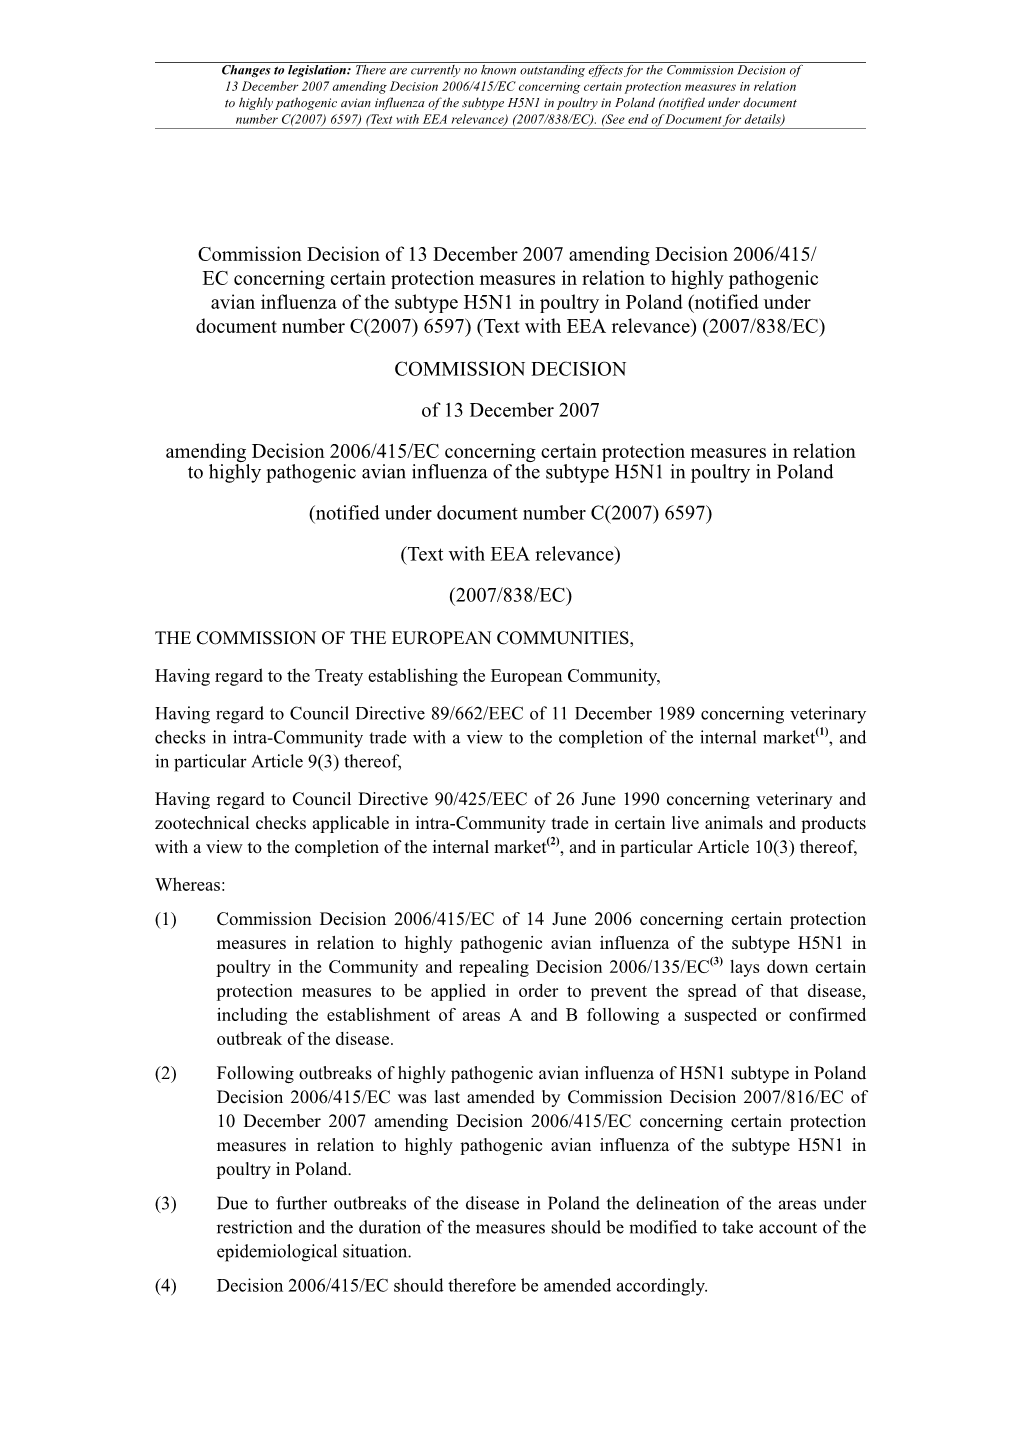 Commission Decision of 13 December 2007